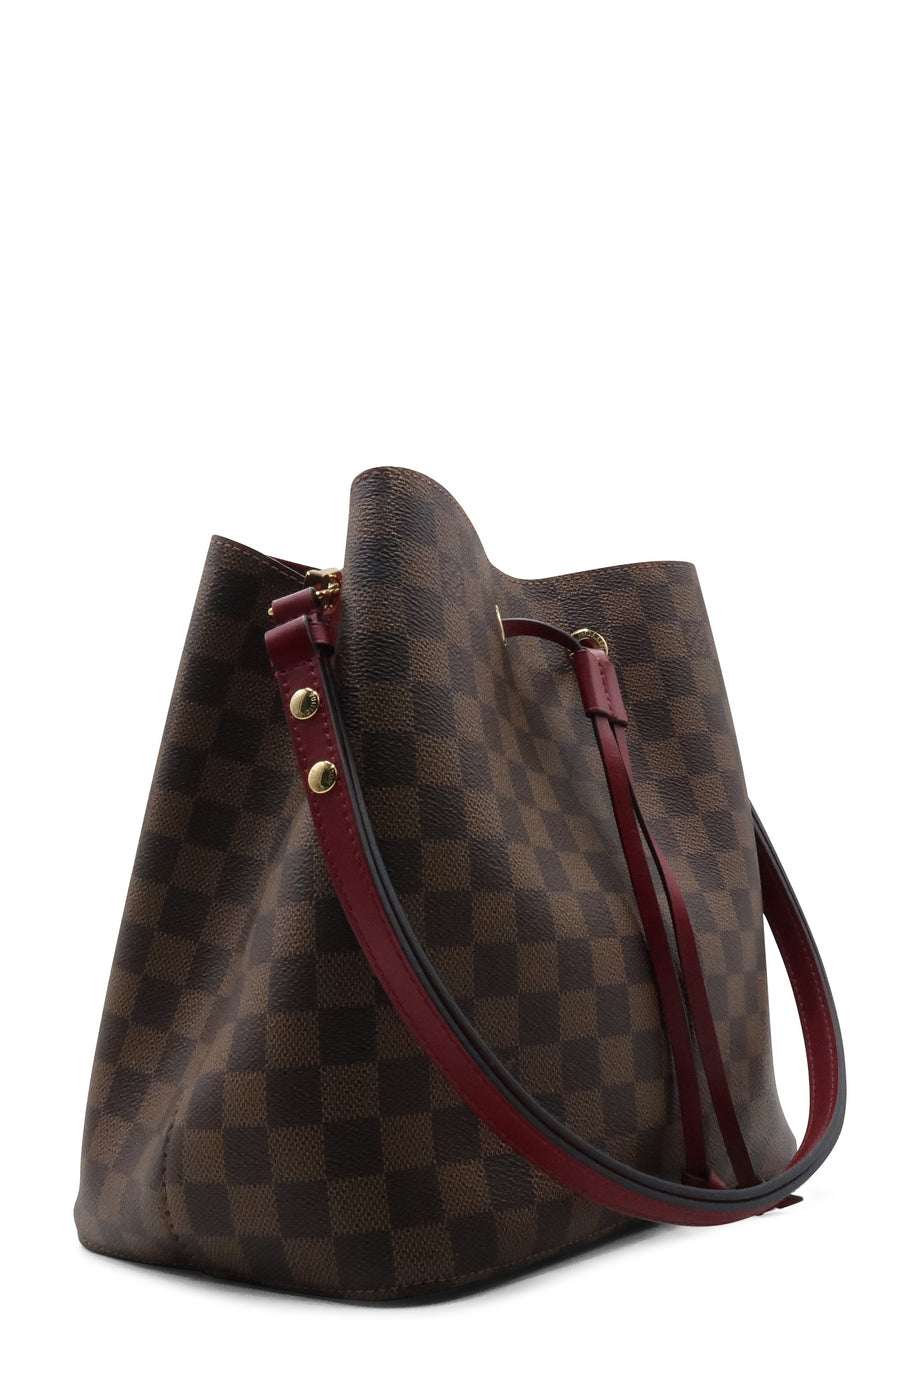 Louis Vuitton NeoNoe Damier Black/White in Coated Canvas/Leather